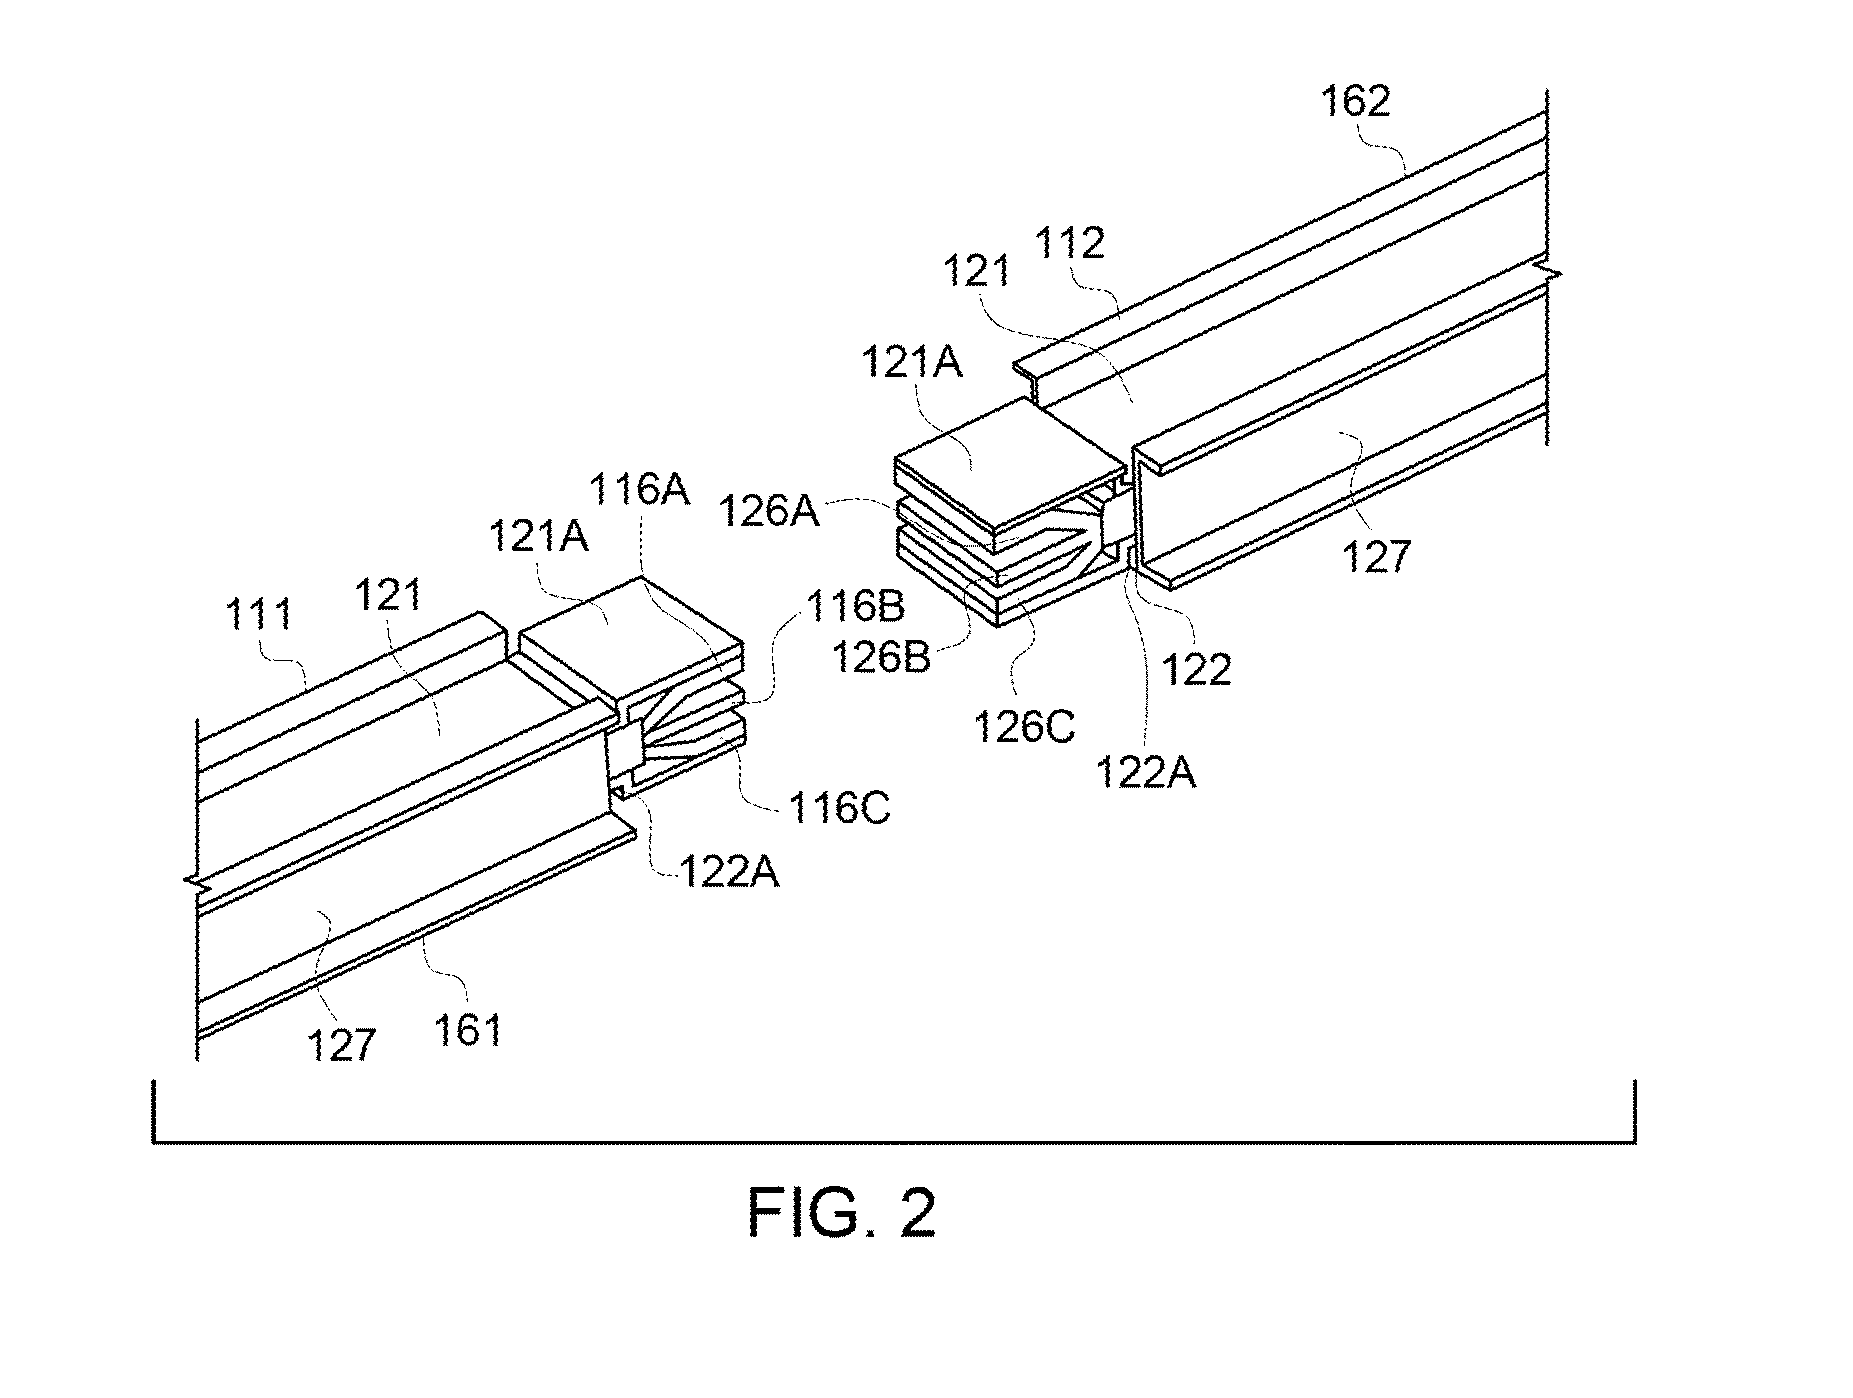 Busway joint coupling having a splice plate with a longitudinal rib